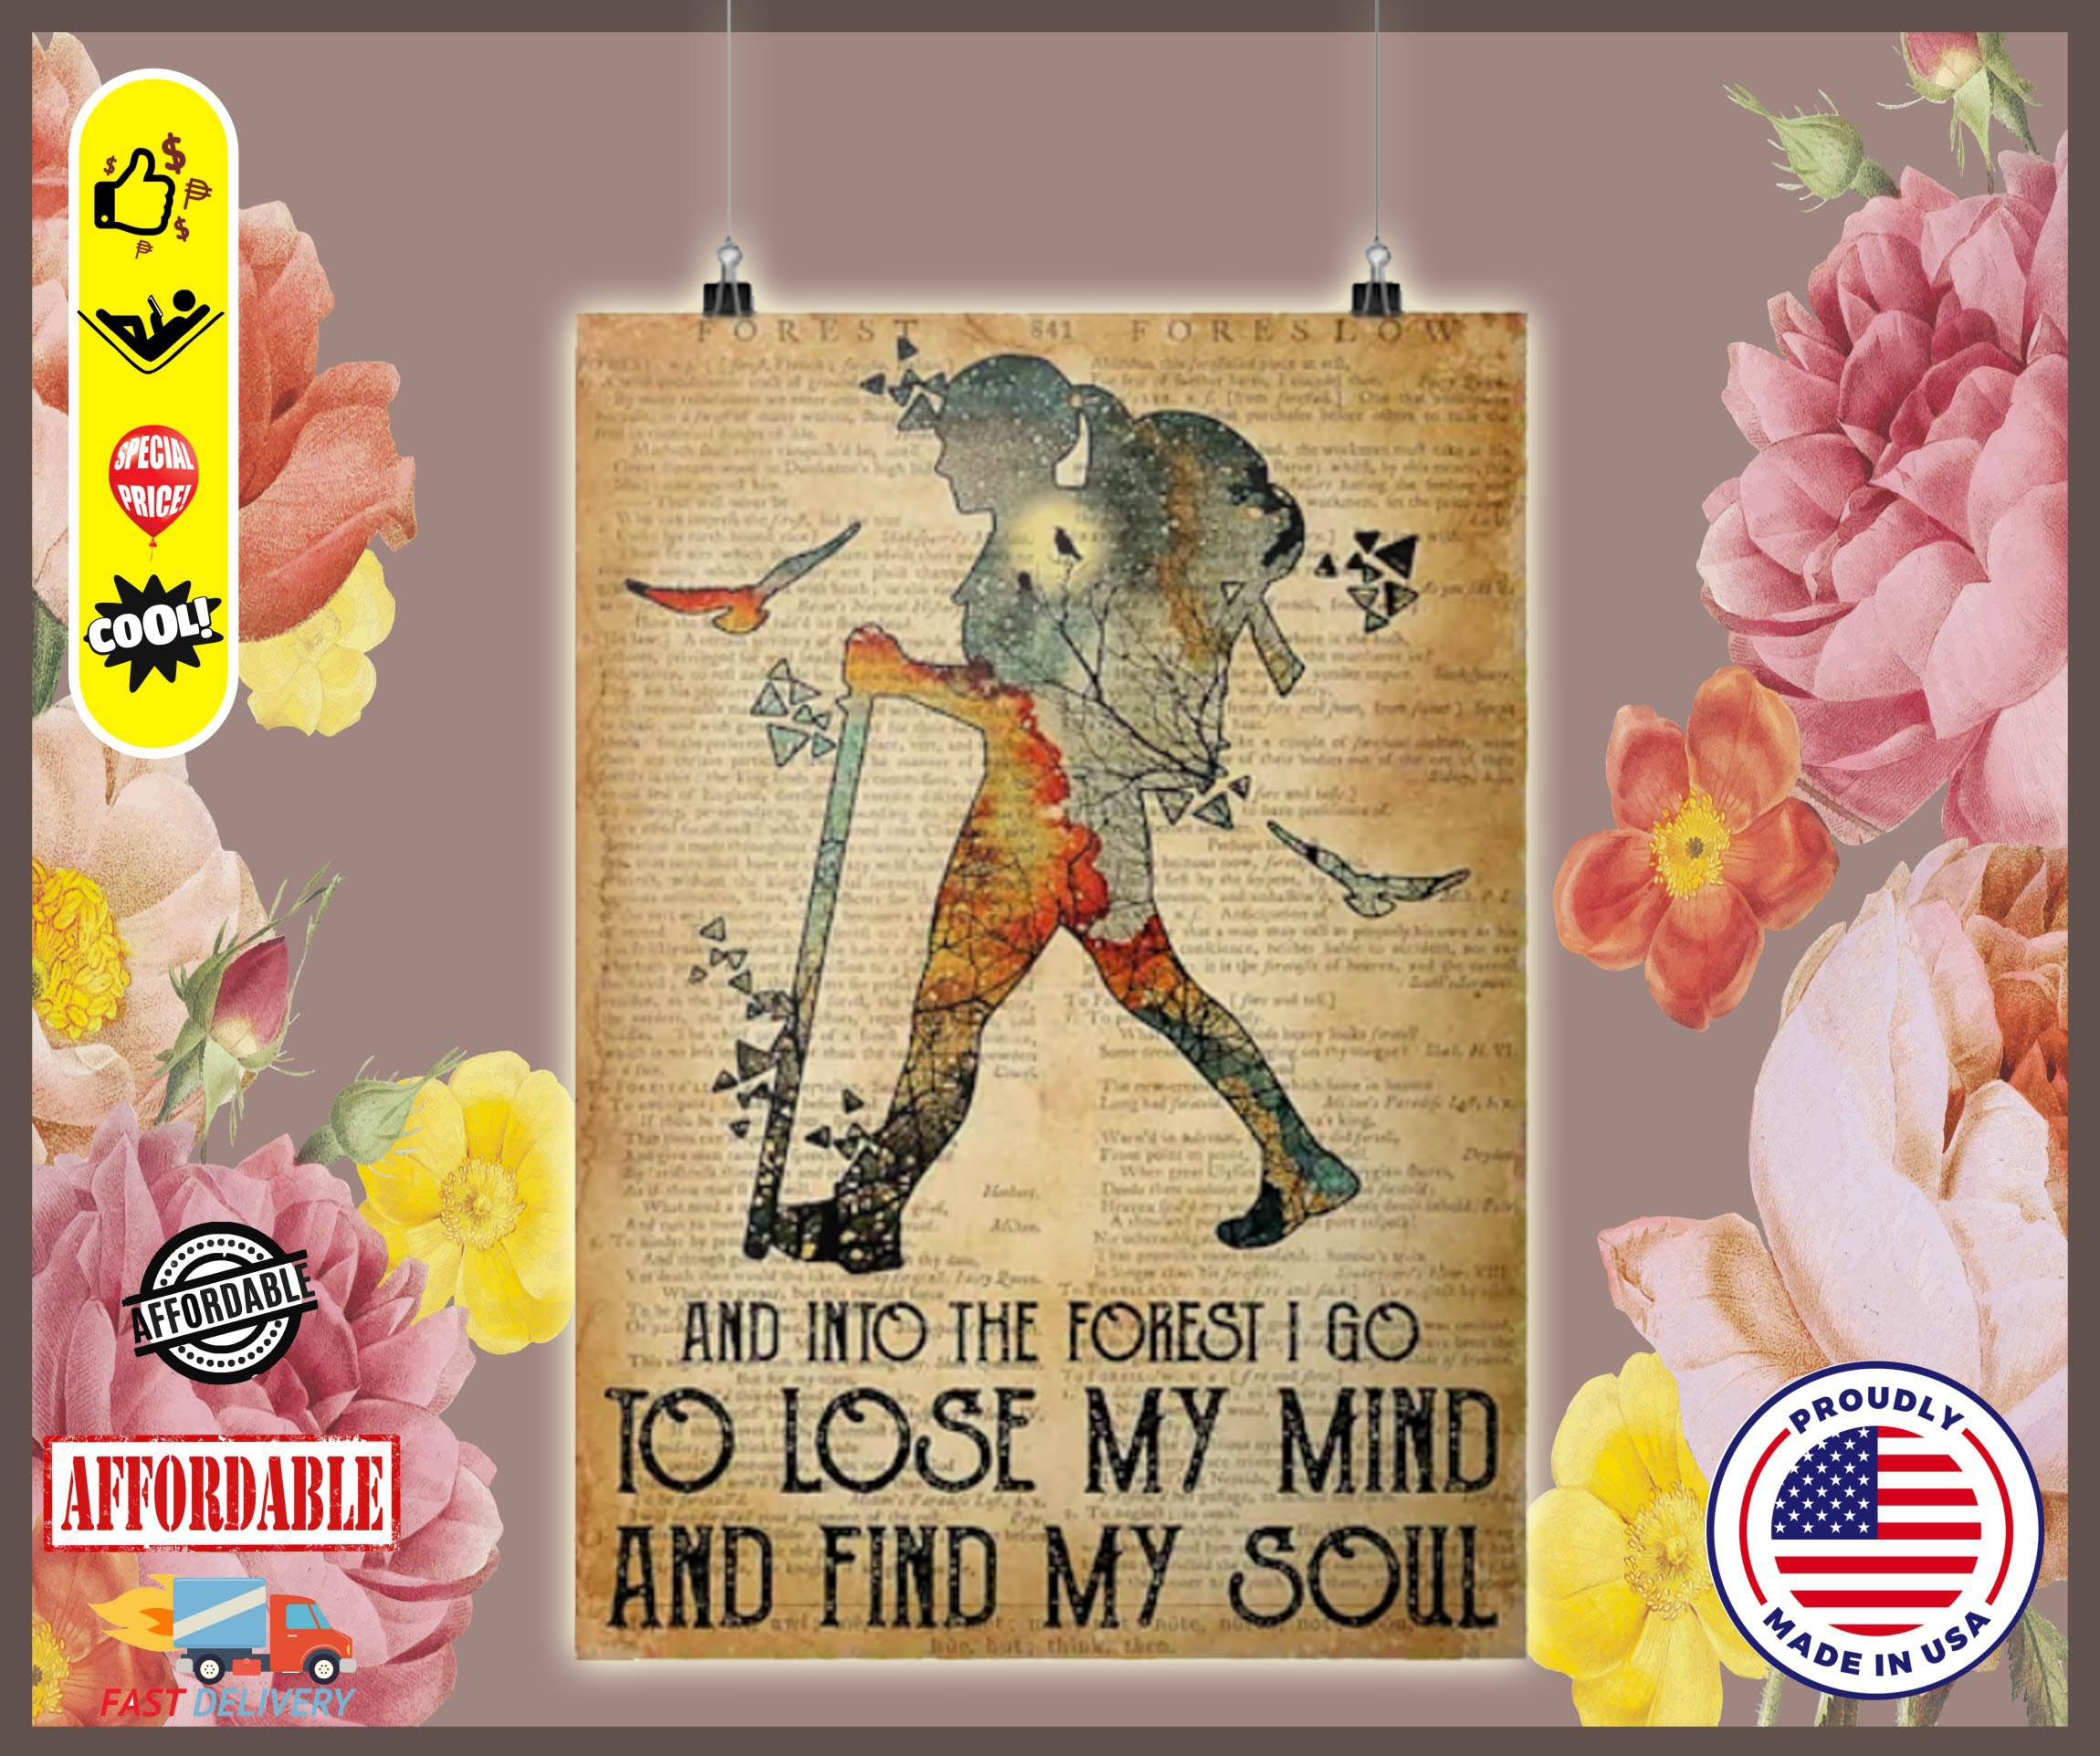 Hiking and into the forest i go to lose my mind and find my soul poster 2